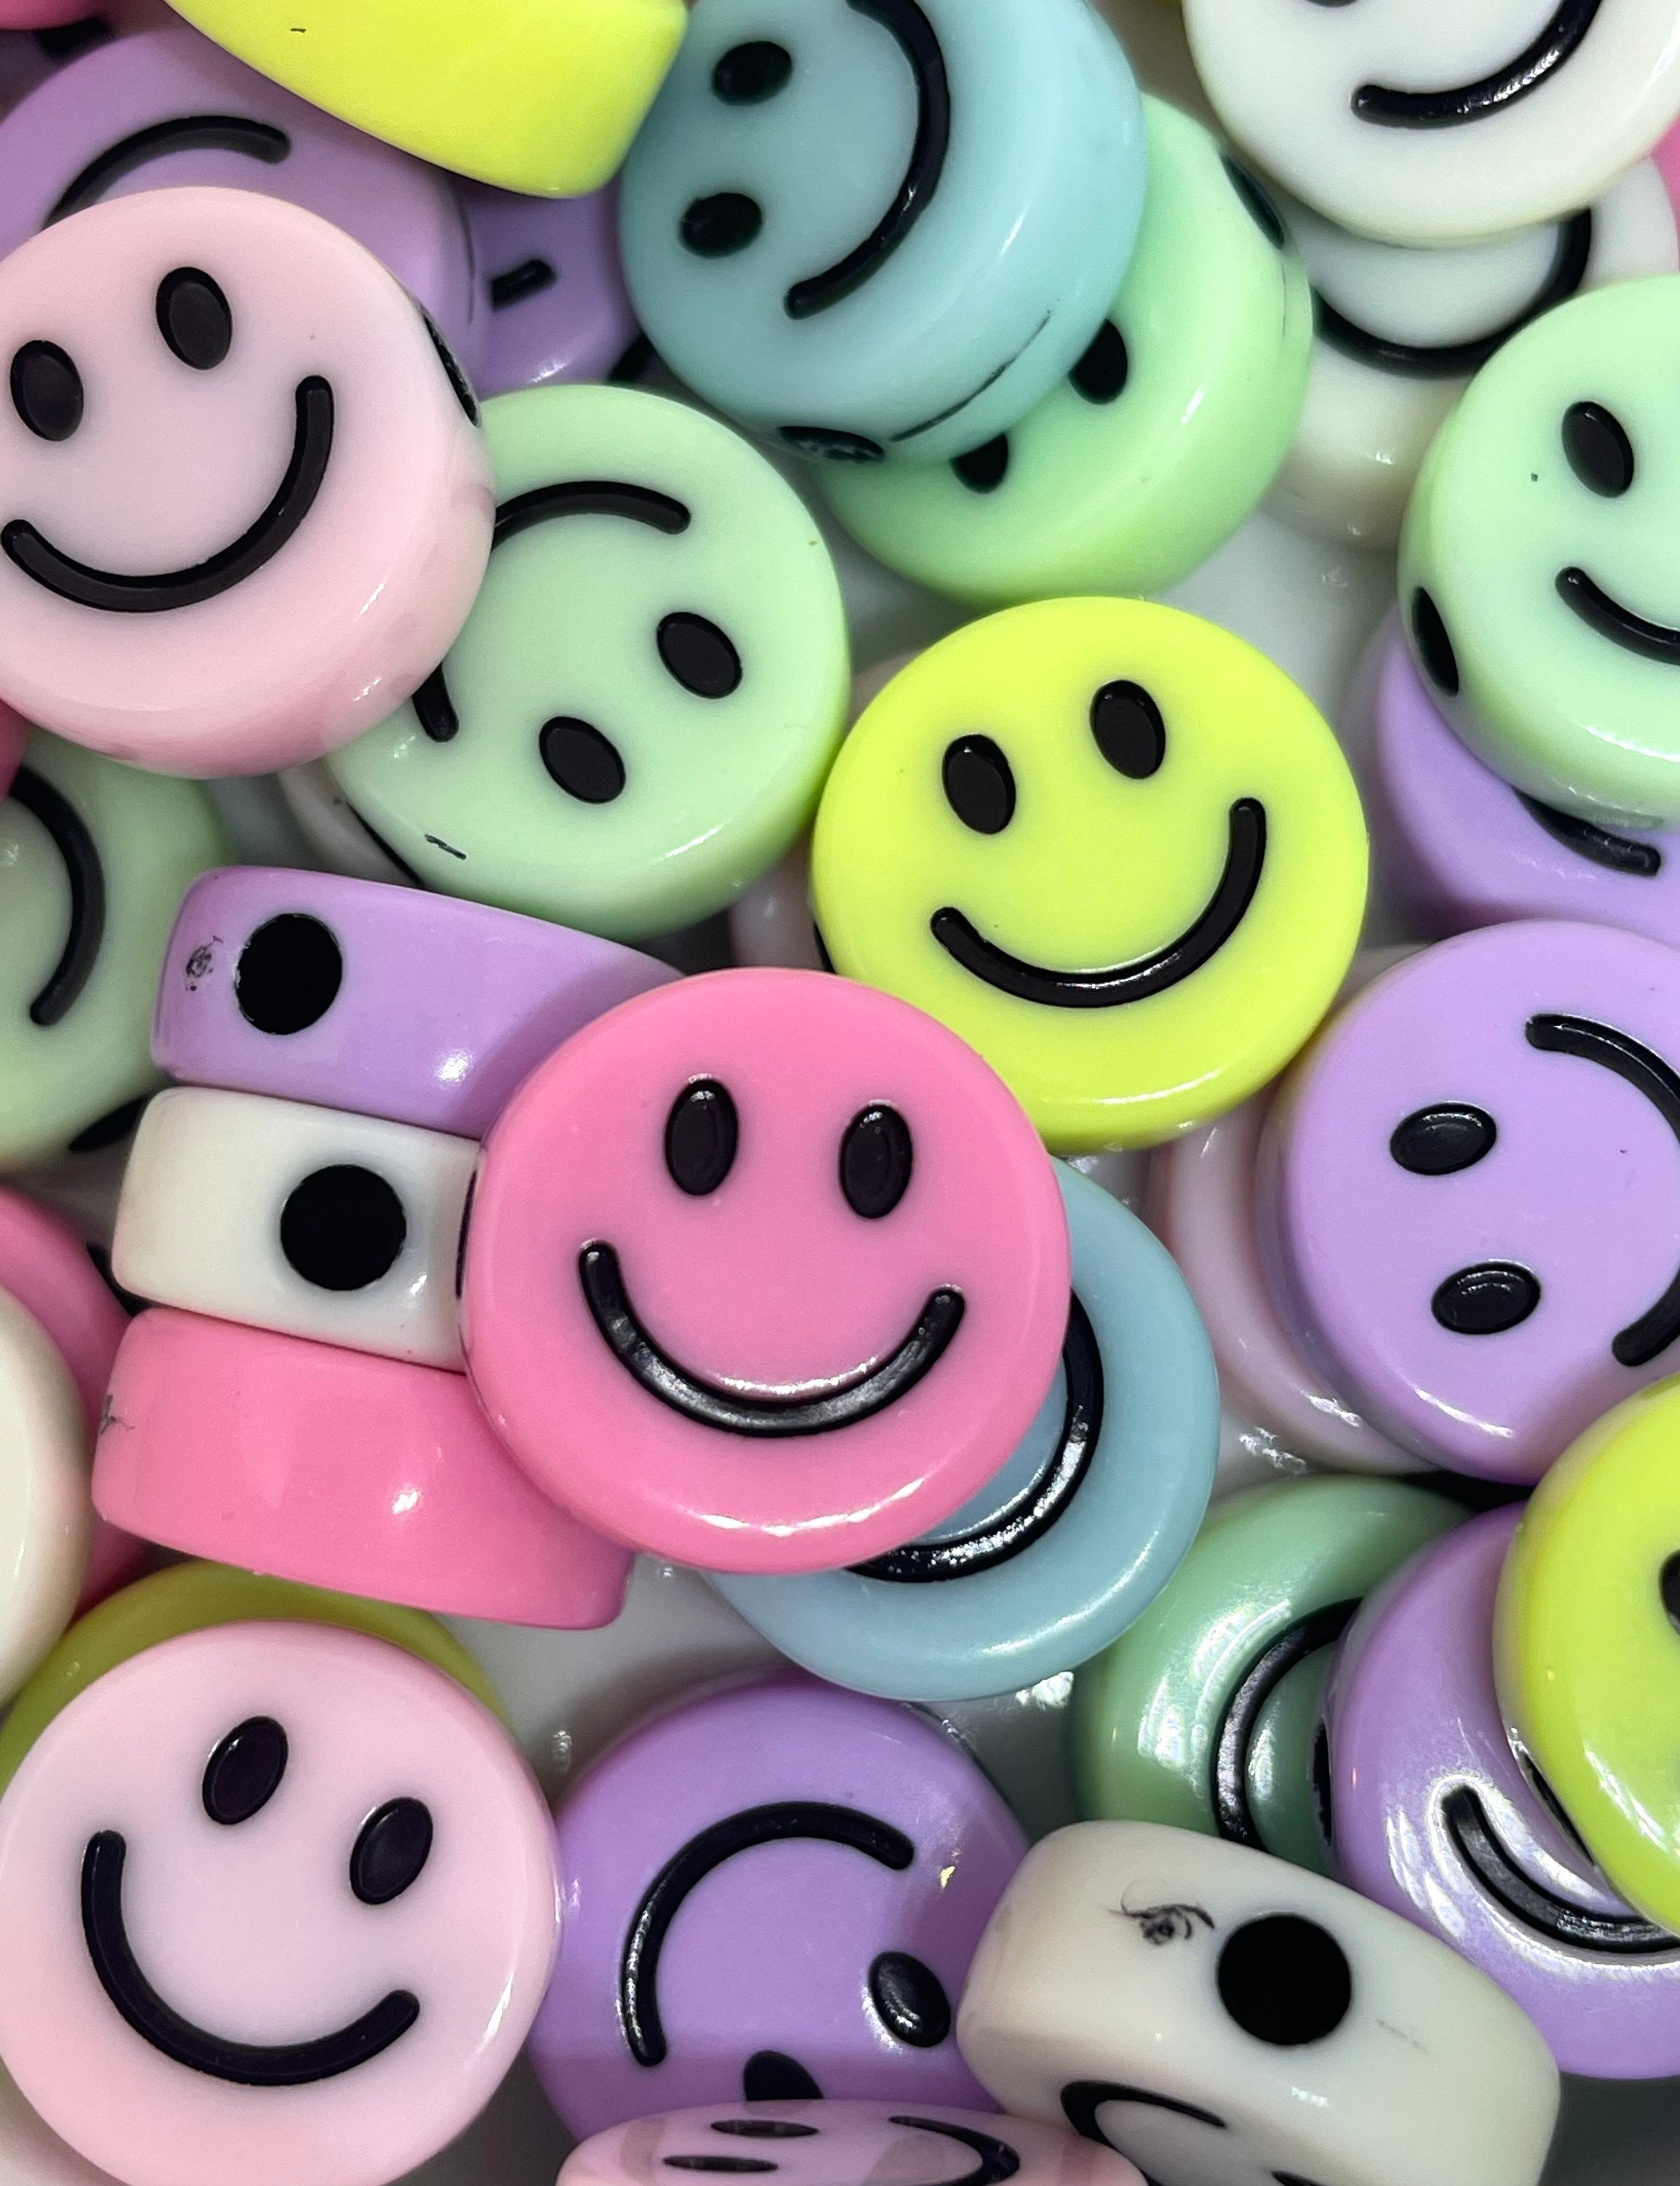 Gxueshan 480 Pcs 14 Colors Acrylic Smile Face Beads for Jewelry Bracelet  Earring Necklace Craft Mobile Phone Pendant Making Kit Happy Face Beads